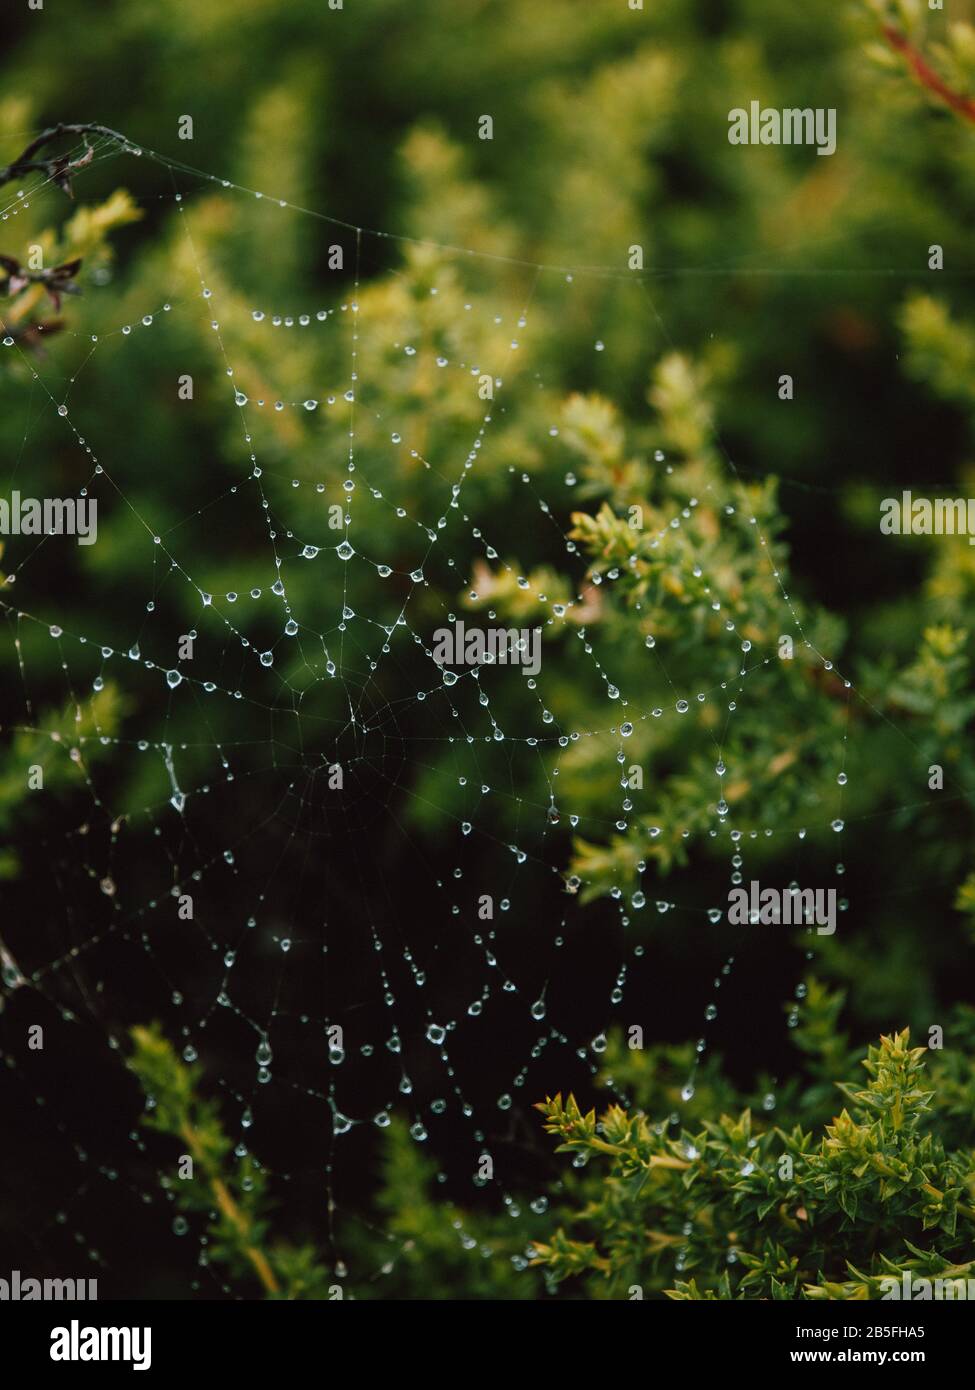 A spider's web emphasised by water droplets in the green bushes in Australia Stock Photo